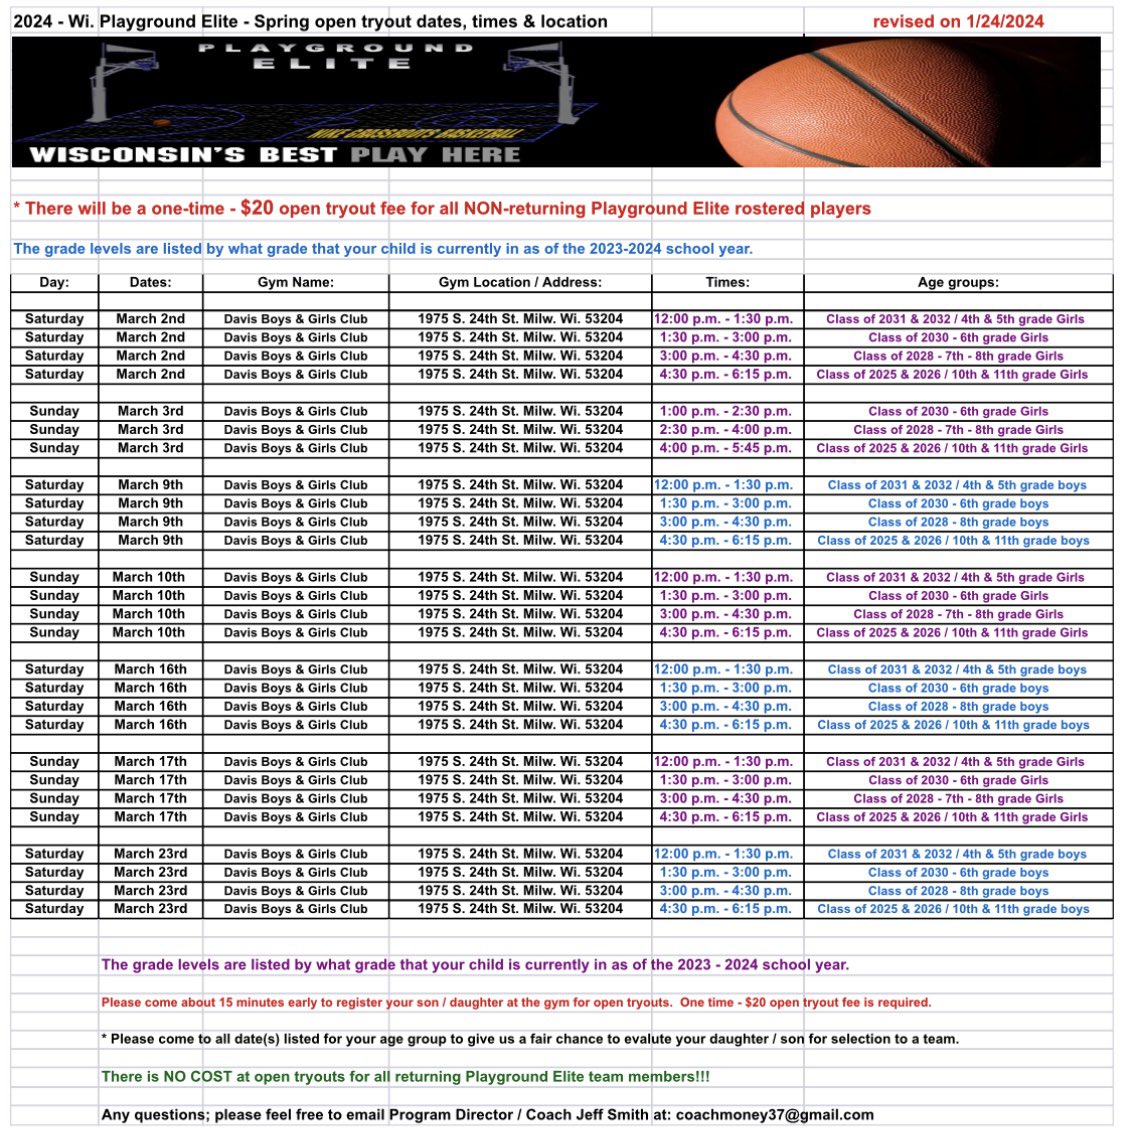 2024 Wisconsin Playground Elite Girls Basketball Spring Open Tryouts Saturday, March 2 Sunday, March 3 Sunday, March 10 Sunday, March 17 1975 S 24th St Milwaukee, WI 53204 Any questions email Program Director/Coach Jeff Smith at: coachmoney37@gmail.com playgroundelite.com/tryouts